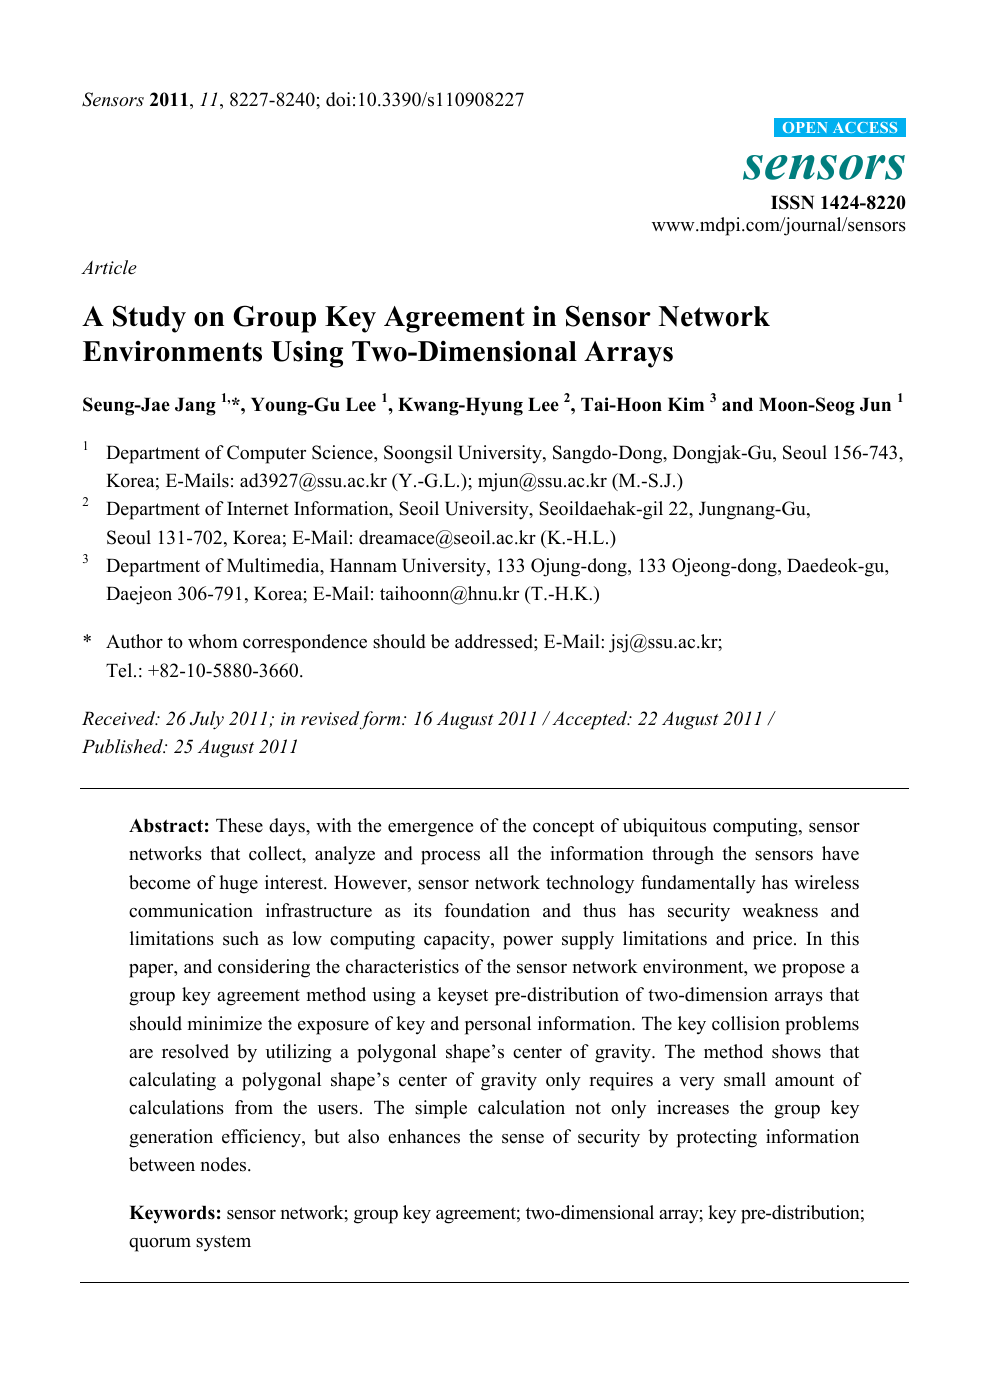 A Study On Group Key Agreement In Sensor Network Environments Using Two Dimensional Arrays Topic Of Research Paper In Electrical Engineering Electronic Engineering Information Engineering Download Scholarly Article Pdf And Read For